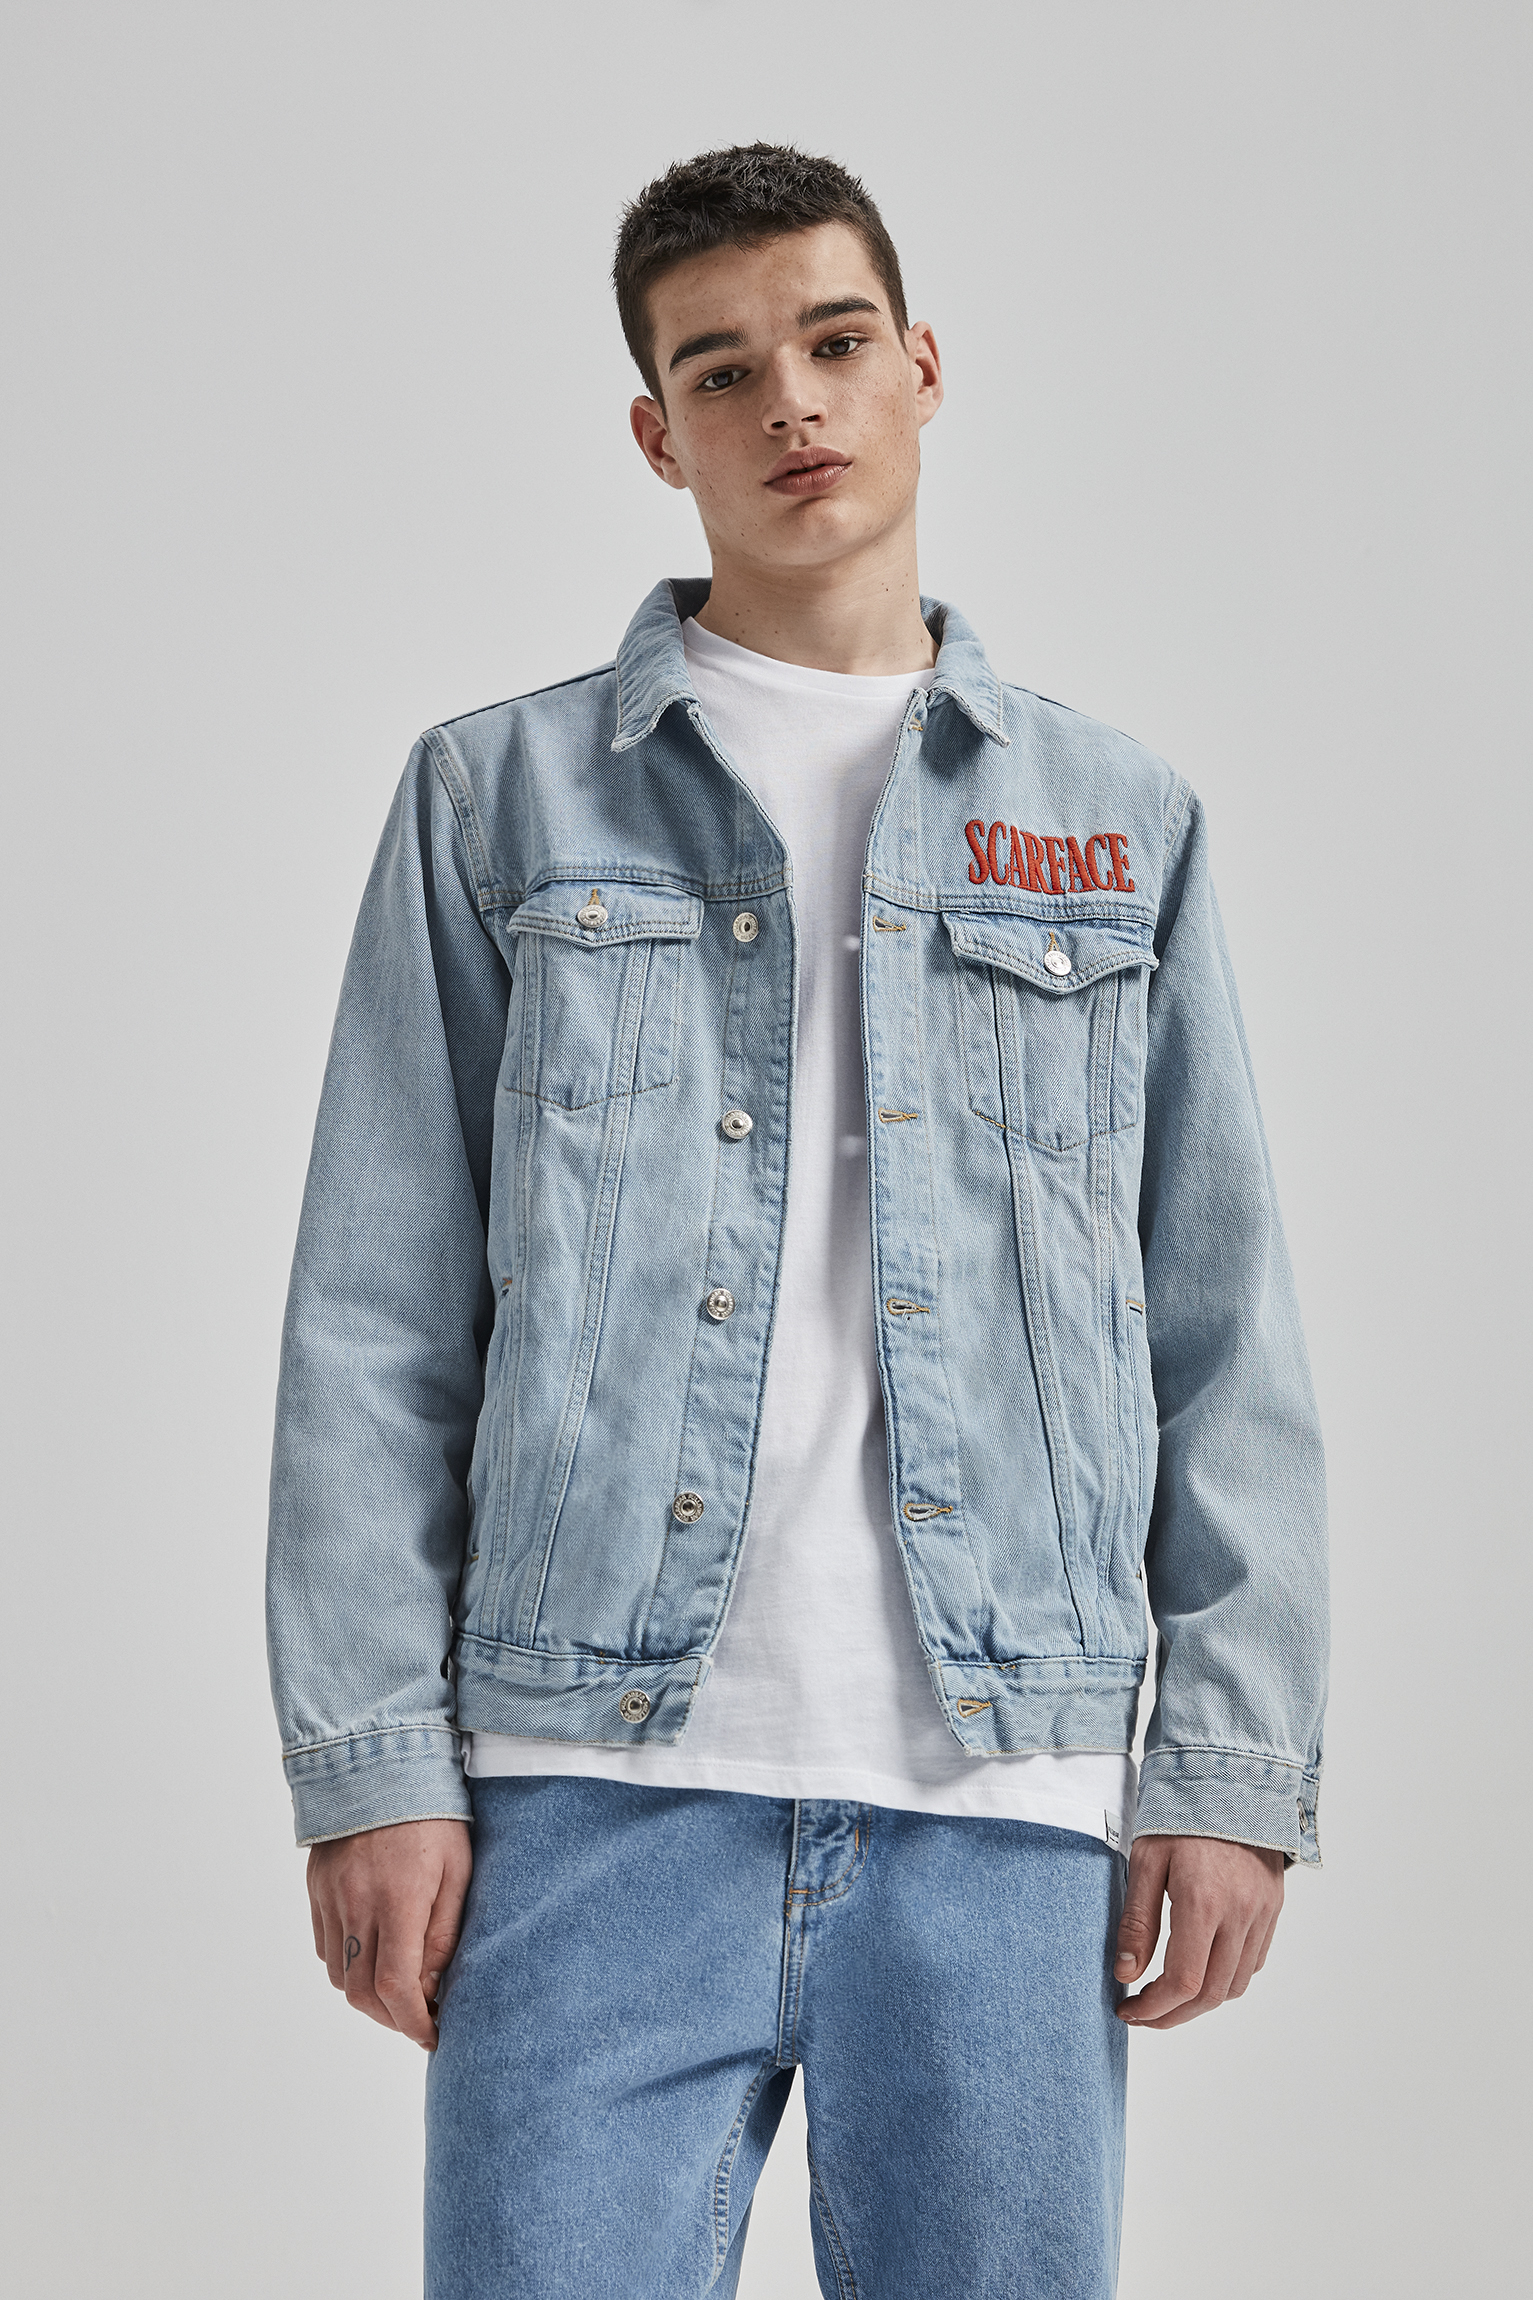 pull and bear jeans jacket